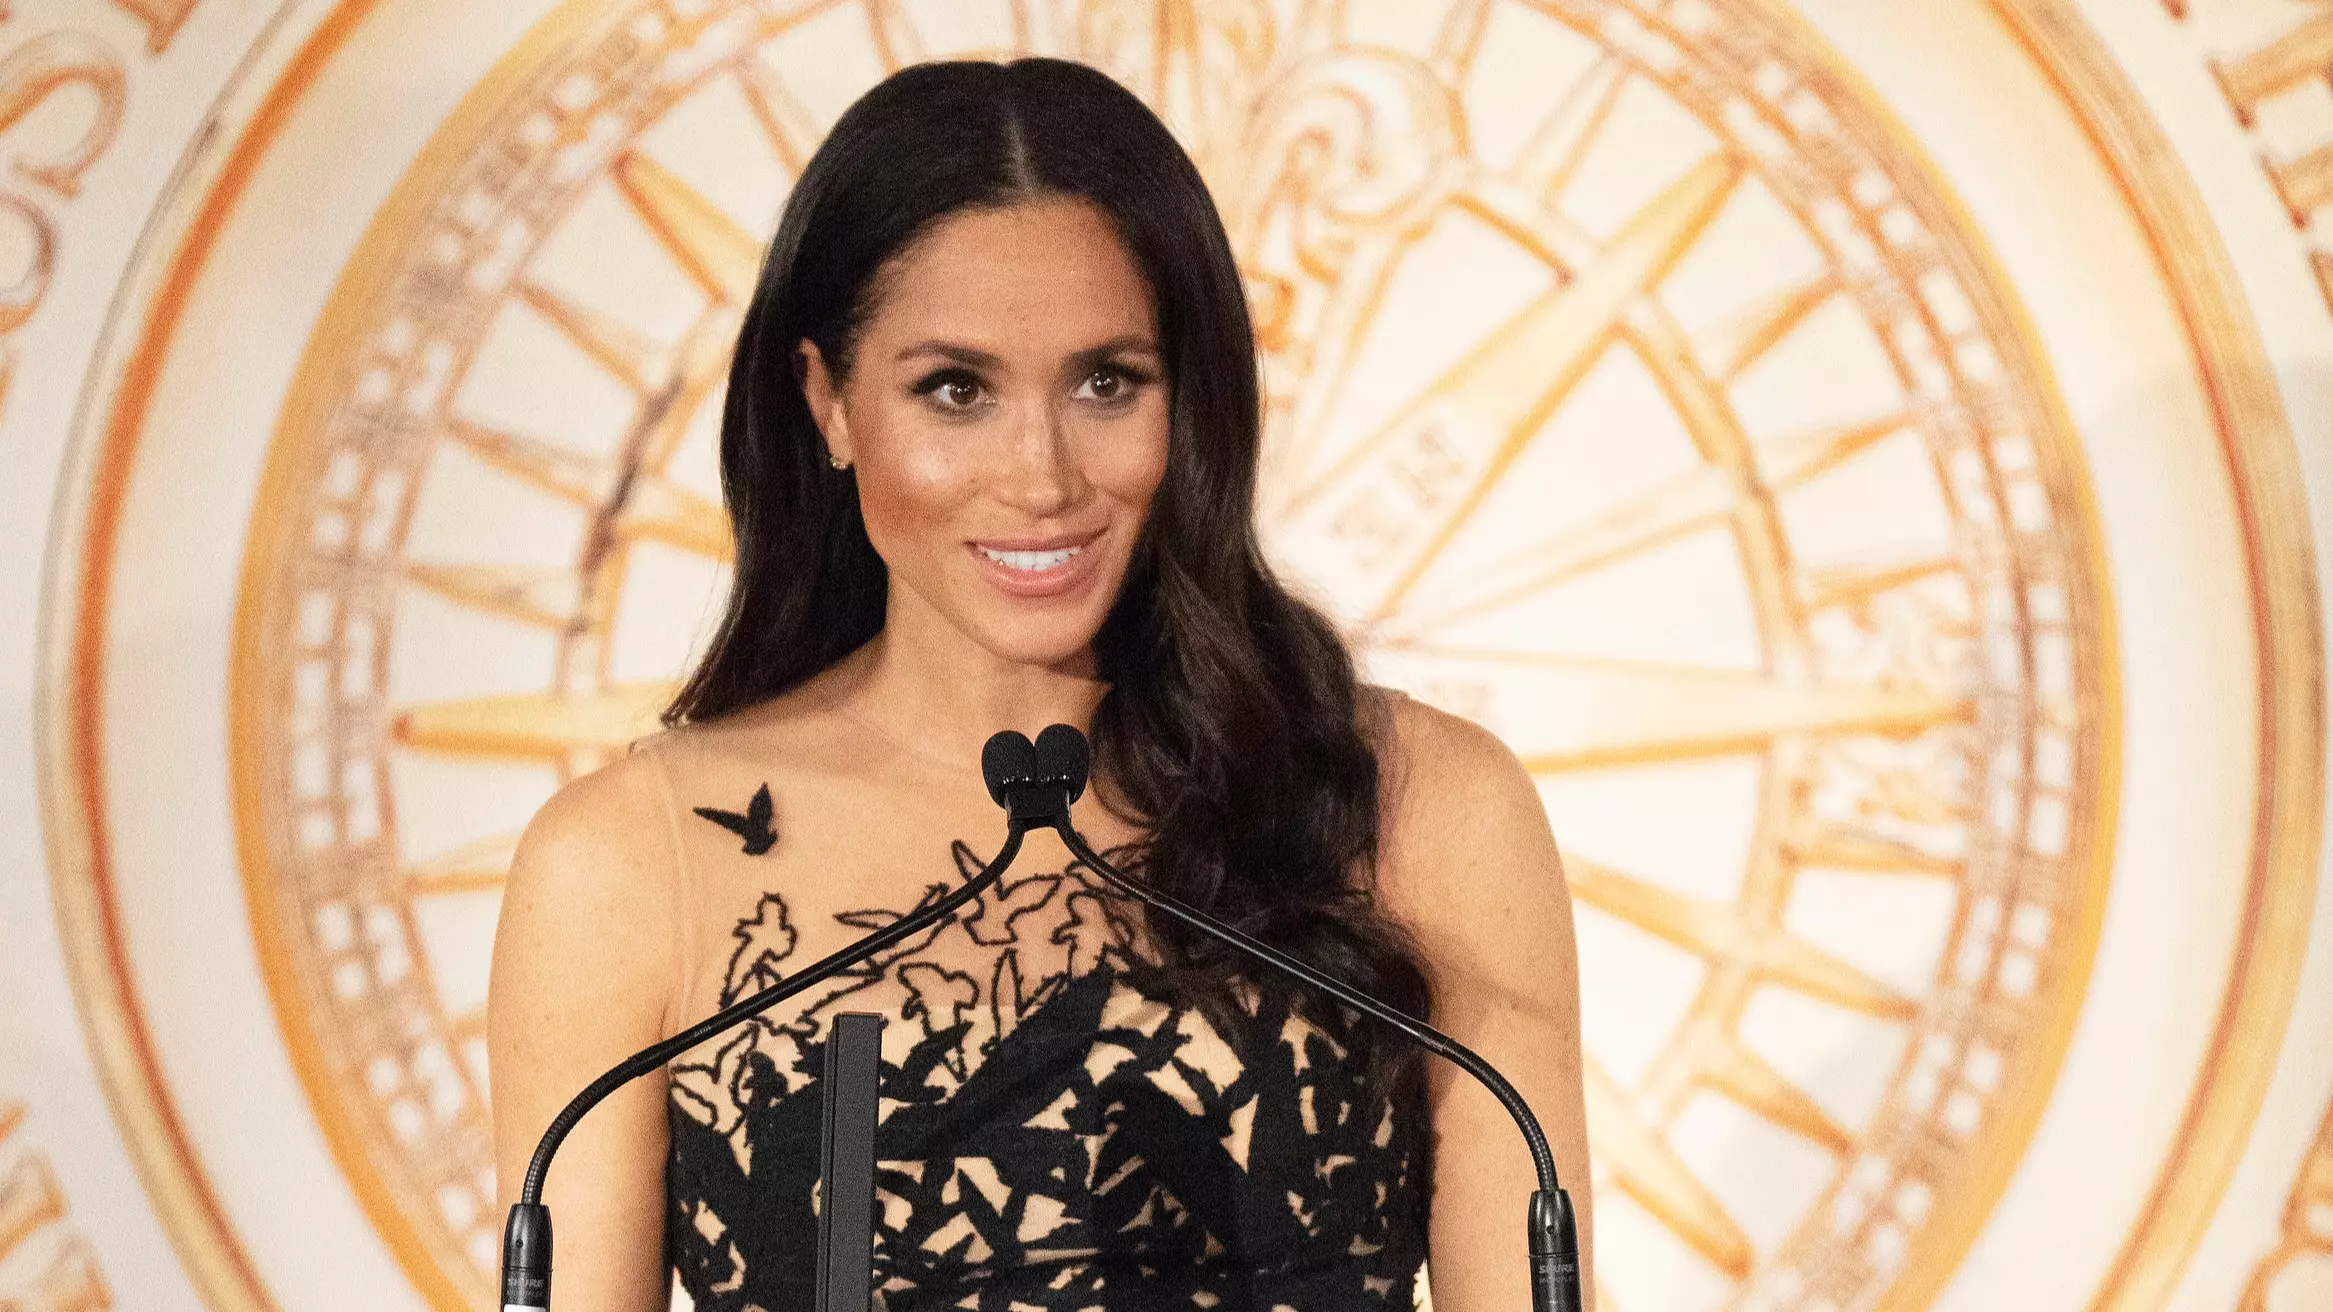 Meghan Markle Just Wore The Most Amazing Ballgown On The Royal Tour